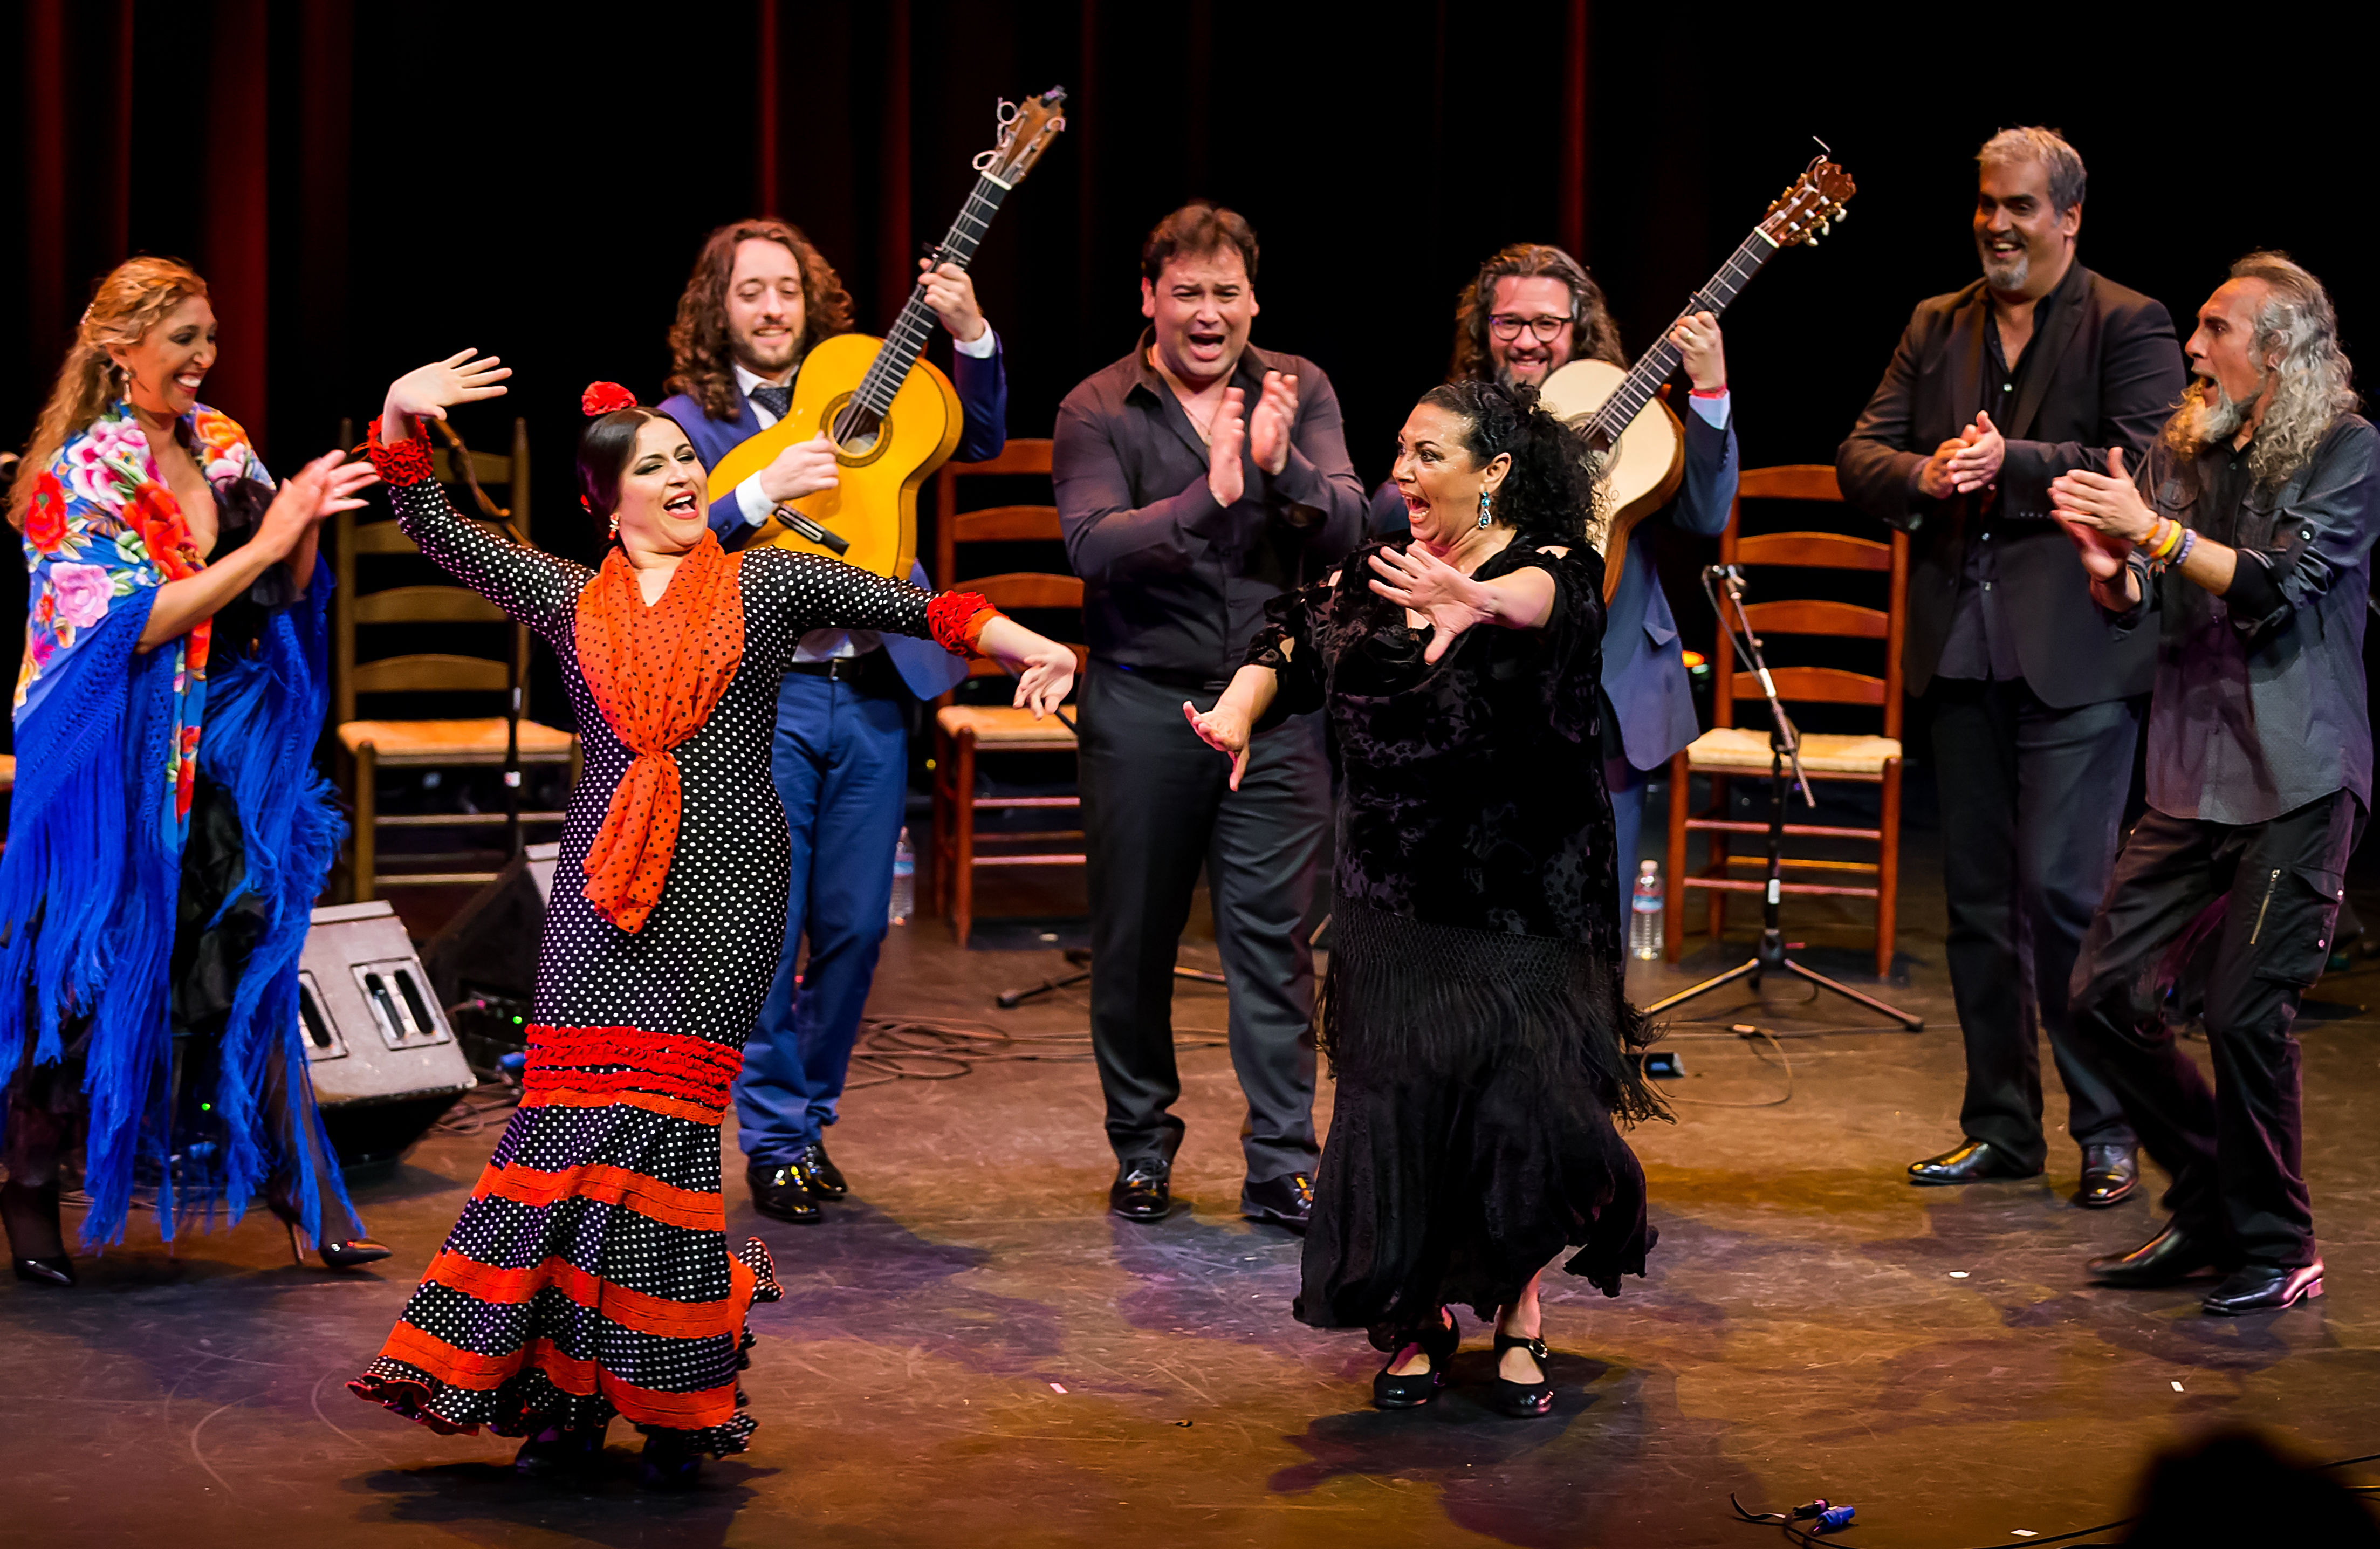 Gema Moneo (red scarf) on stage at the Bay Area Flamenco Festival 2015.